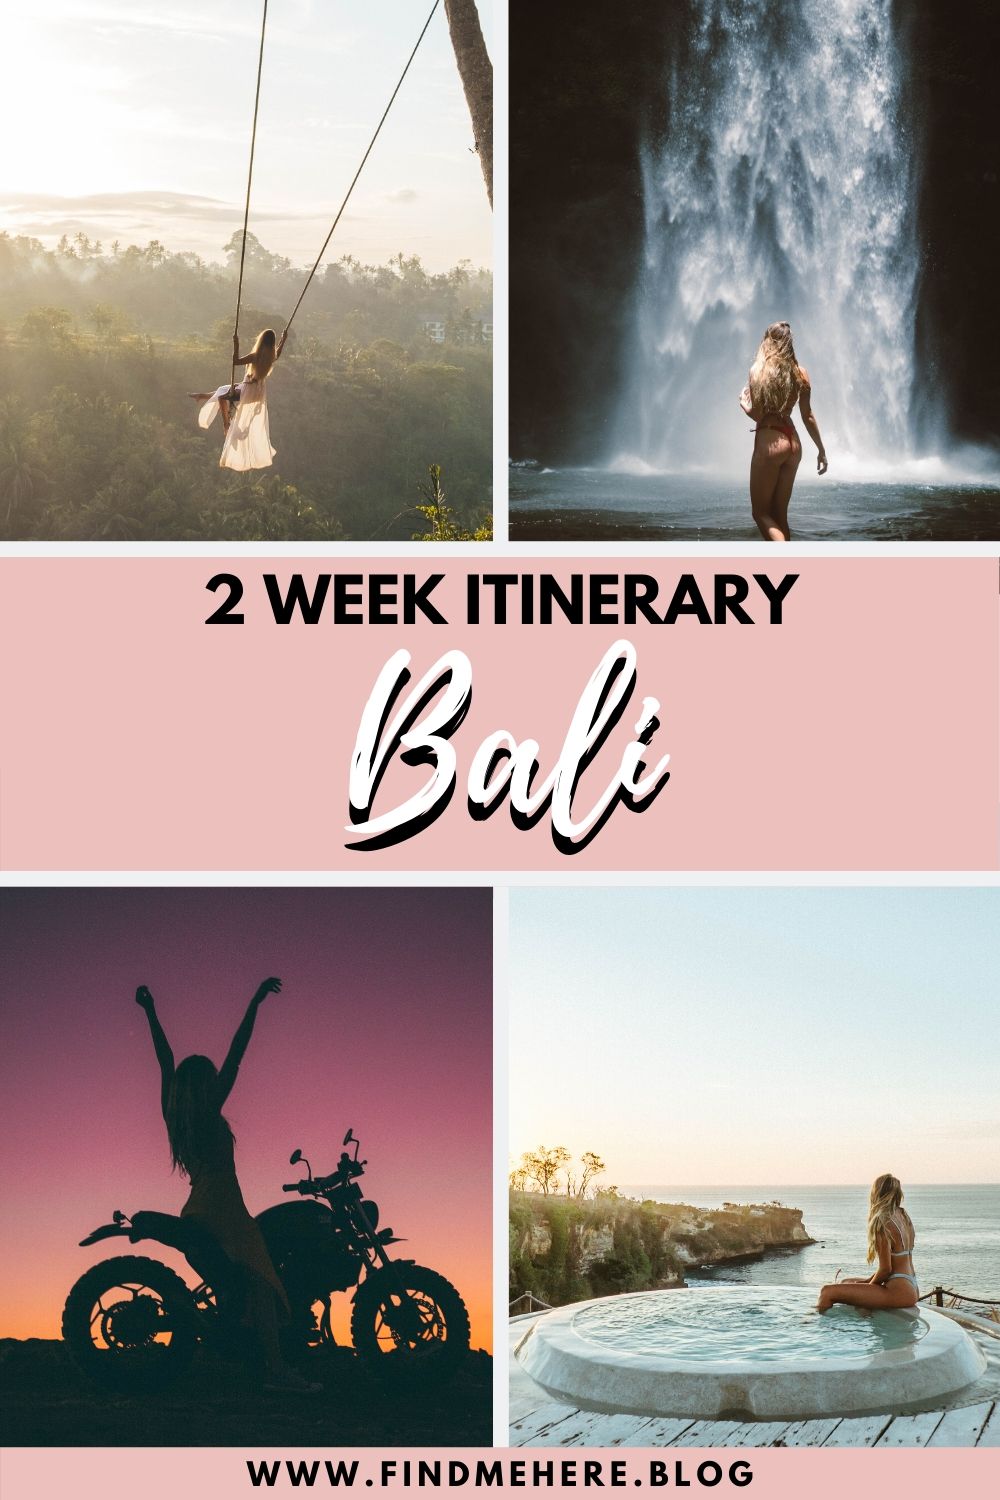 The ultimate travel itinerary guide to Bali - a bucket list destination! What to do, where to stay, and lots of inspiration. Things to do in Bali - Top Places To Visit In Bali that you must see on your vacation to this Indonesia island. Discover the best beaches, most instagrammable spots, best adventure activities, and hidden gems. Add these top spots to your Bali itinerary for the ultimate vacation | instagram places in Bali | Bali photography